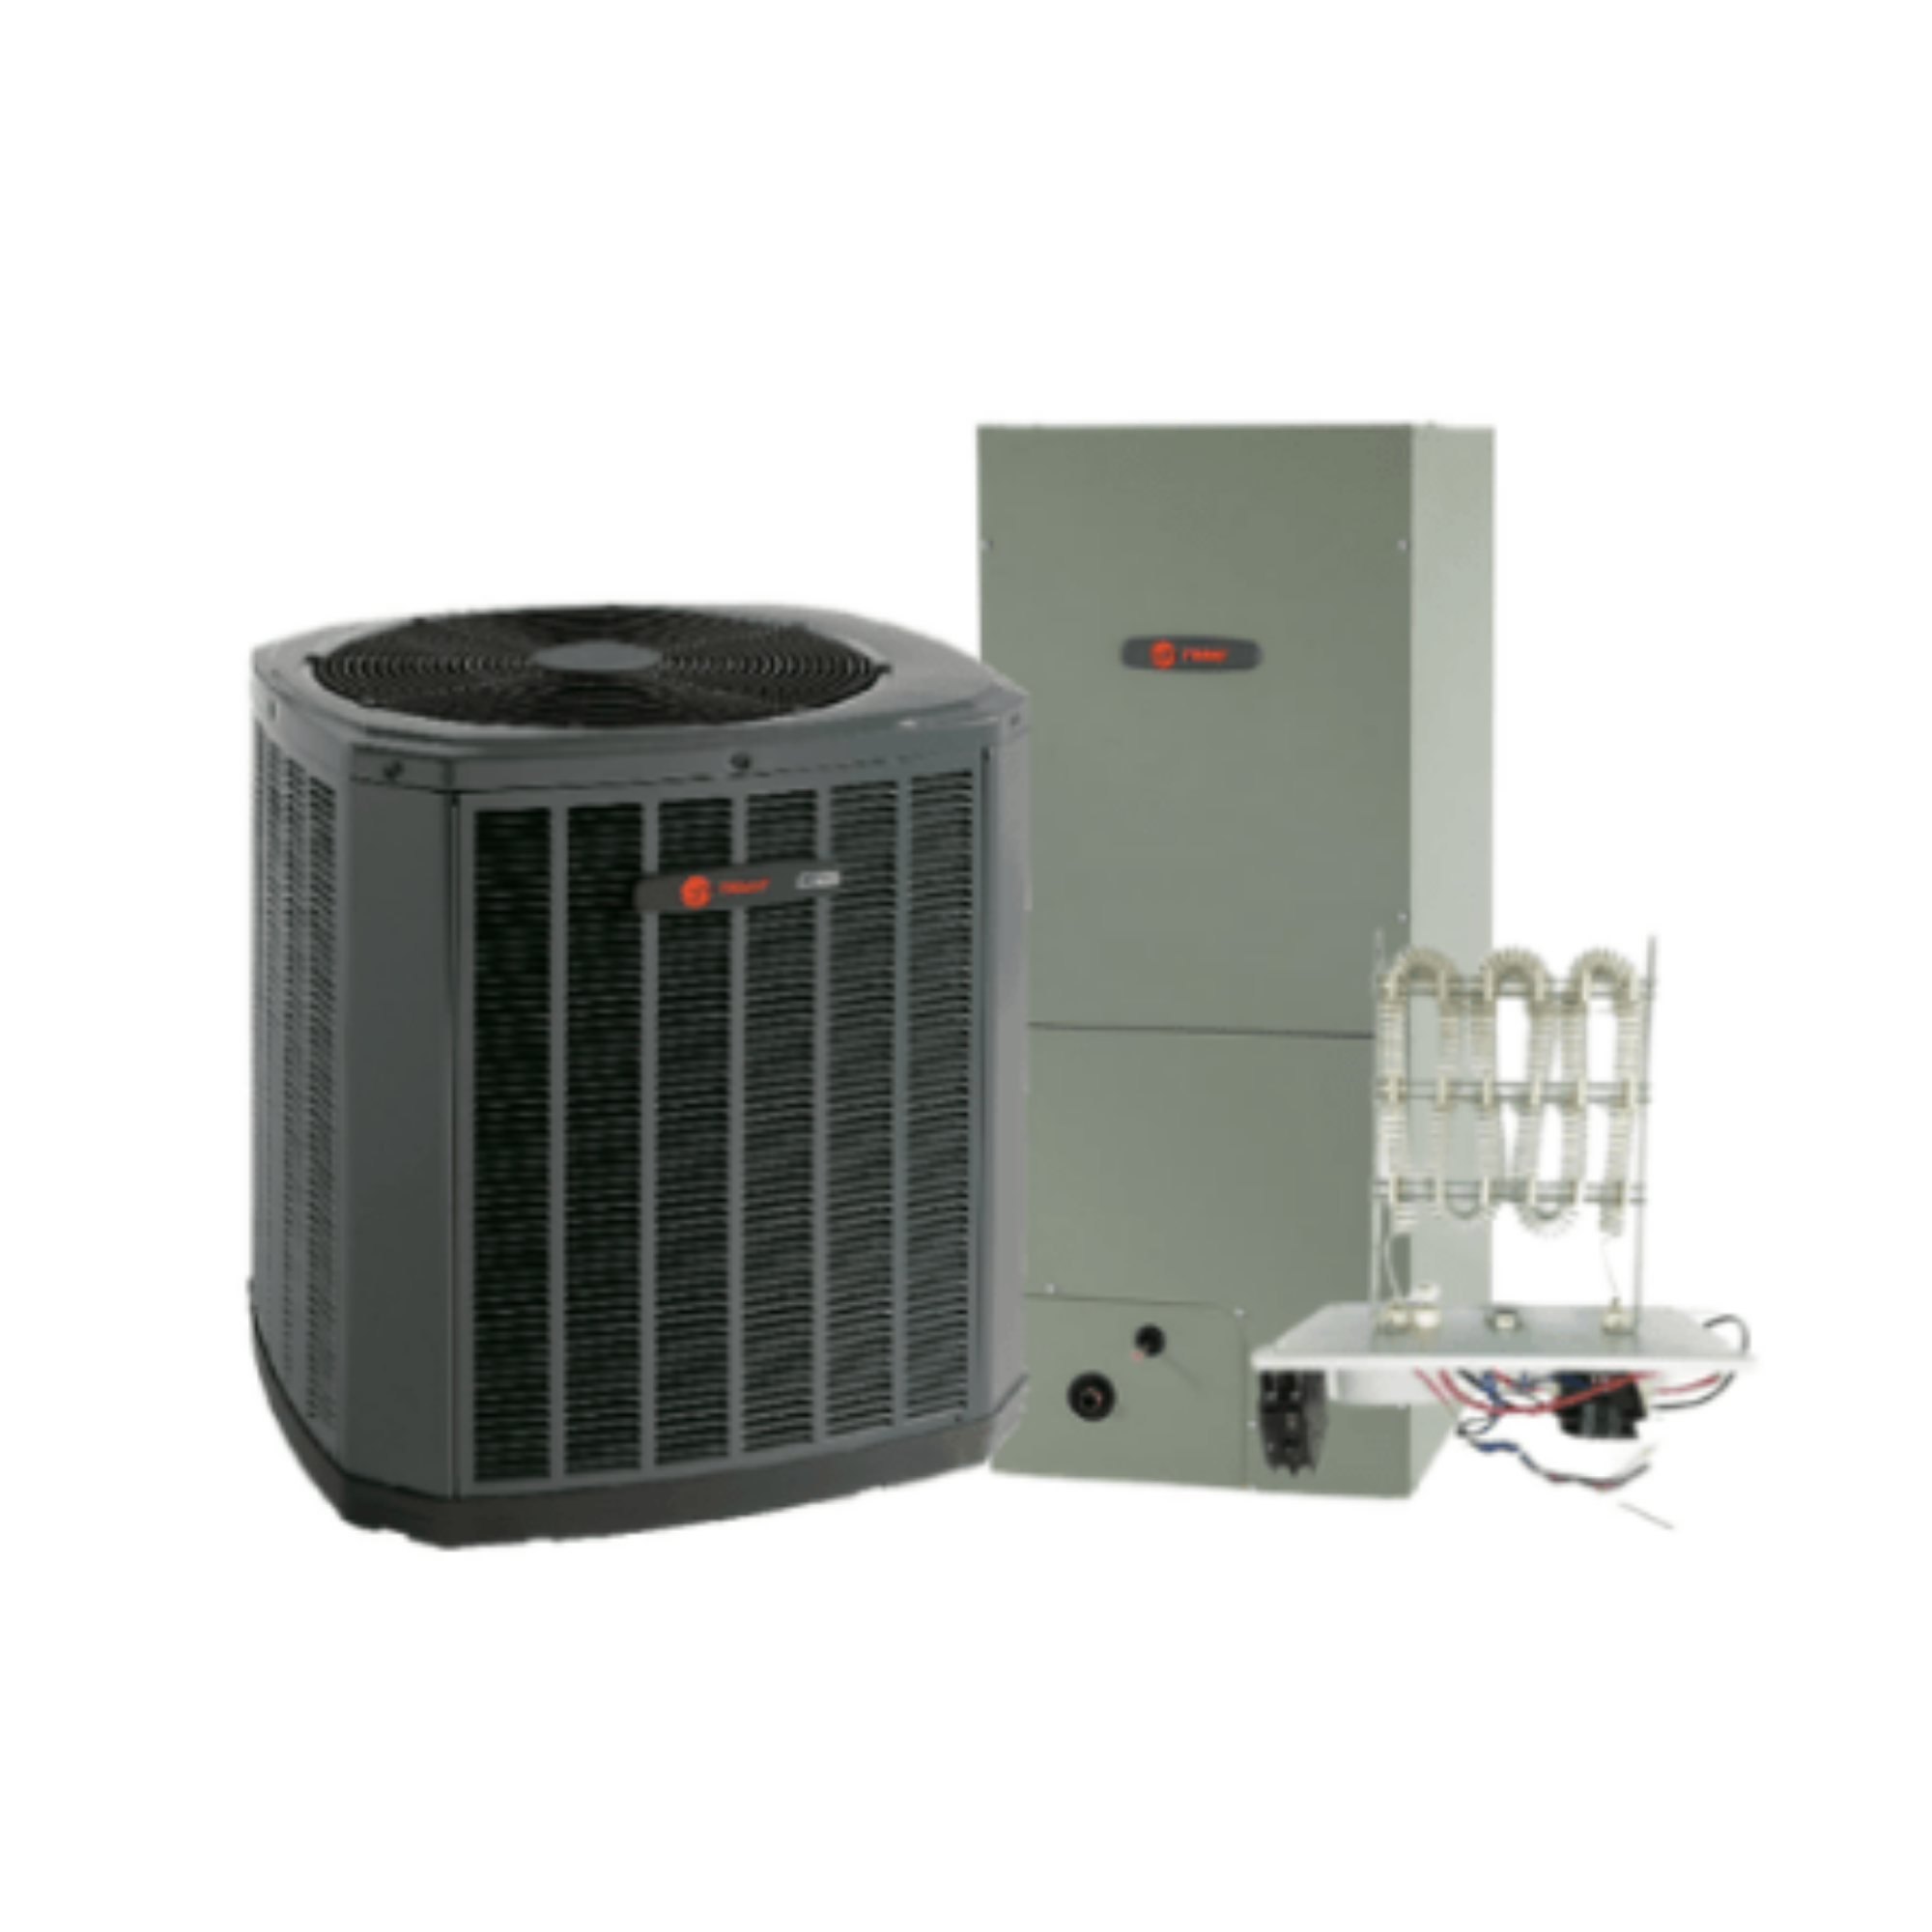 Heat pump with electric strip